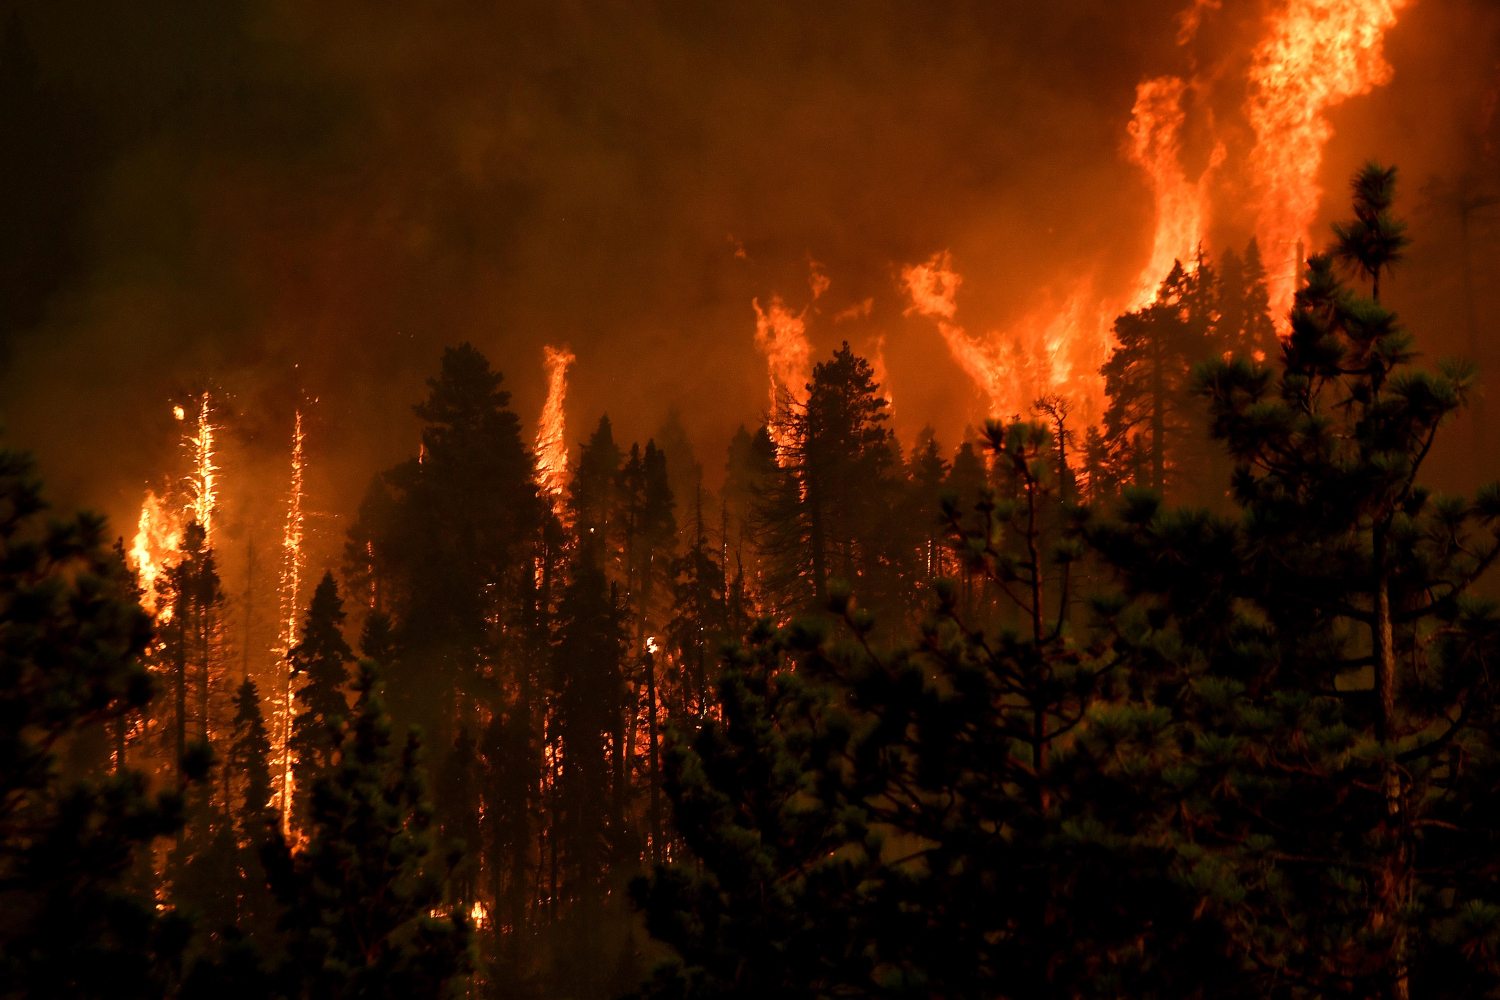 El Dorado wildfire blazes behind trees - a couple whose gender reveal party started the blaze faces possible jail time